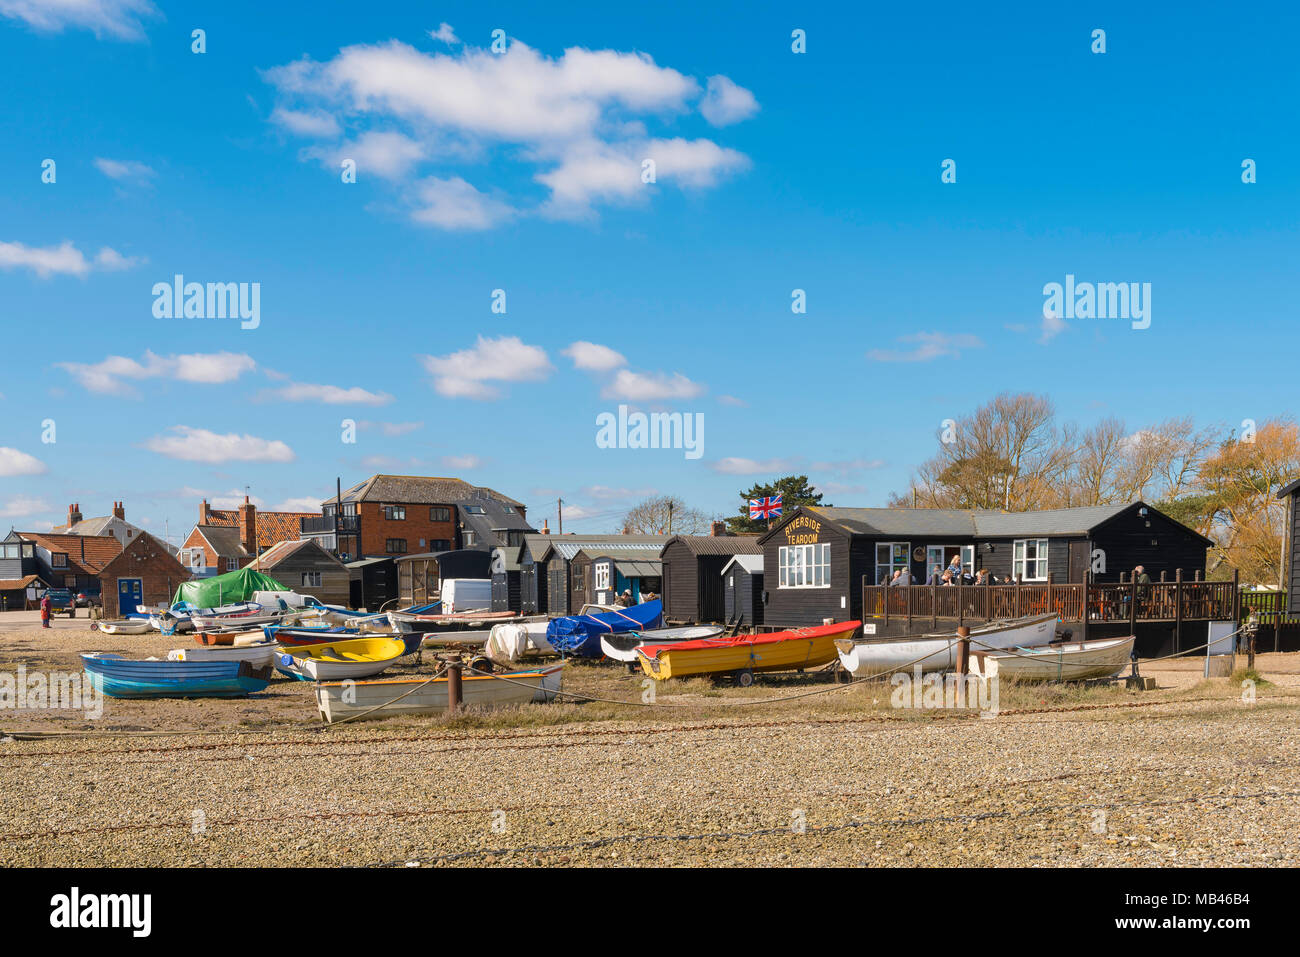 Suffolk beach UK, view of colourful boats and a tea shop on the beach at Orford quay, Suffolk, East Anglia, England, UK. Stock Photo